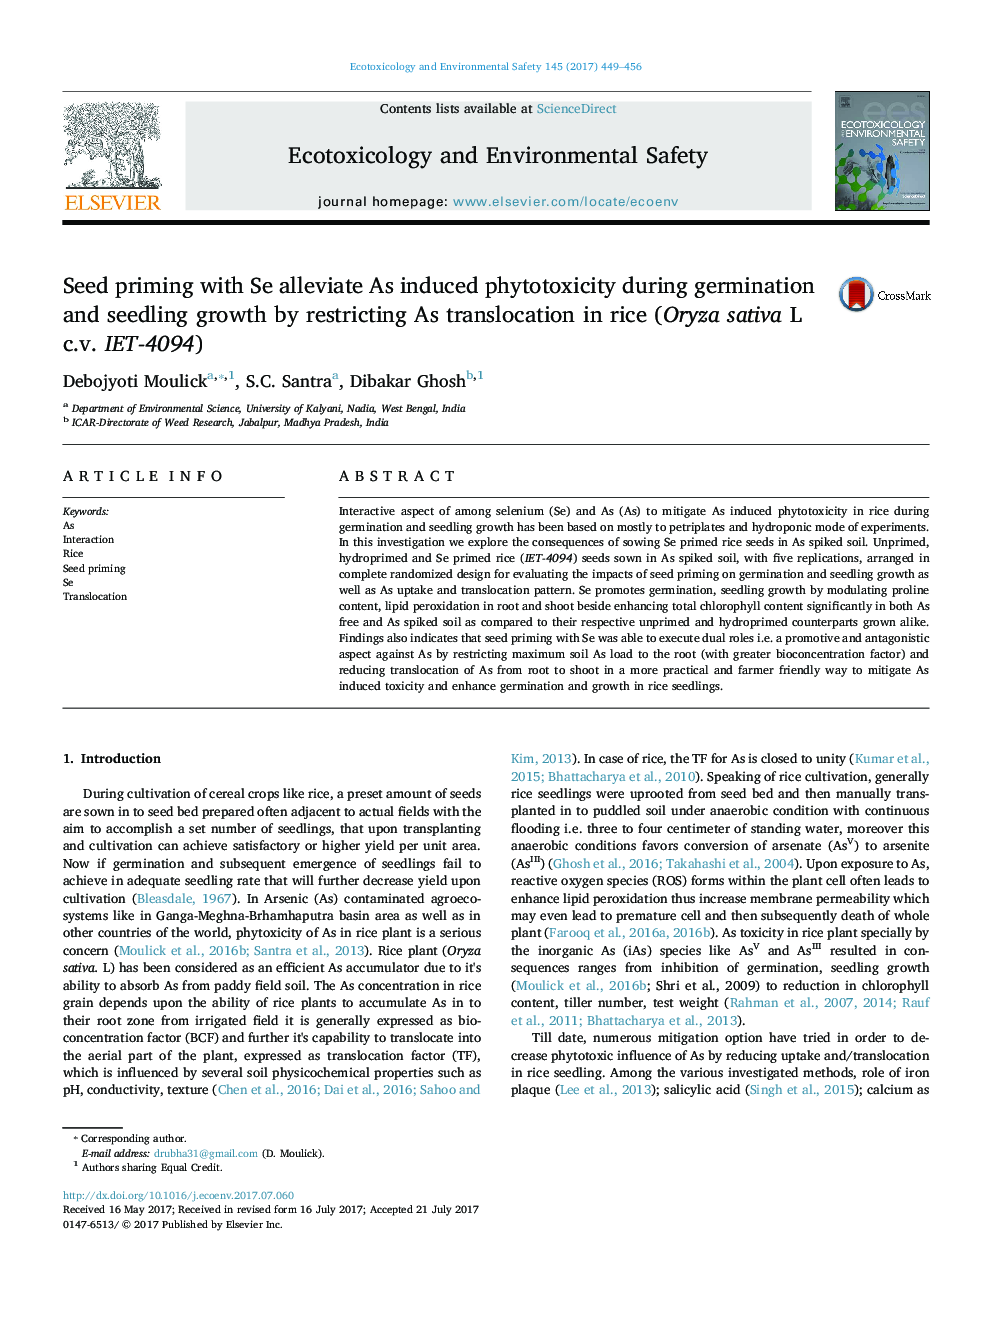 Seed priming with Se alleviate As induced phytotoxicity during germination and seedling growth by restricting As translocation in rice (Oryza sativa L c.v. IET-4094)